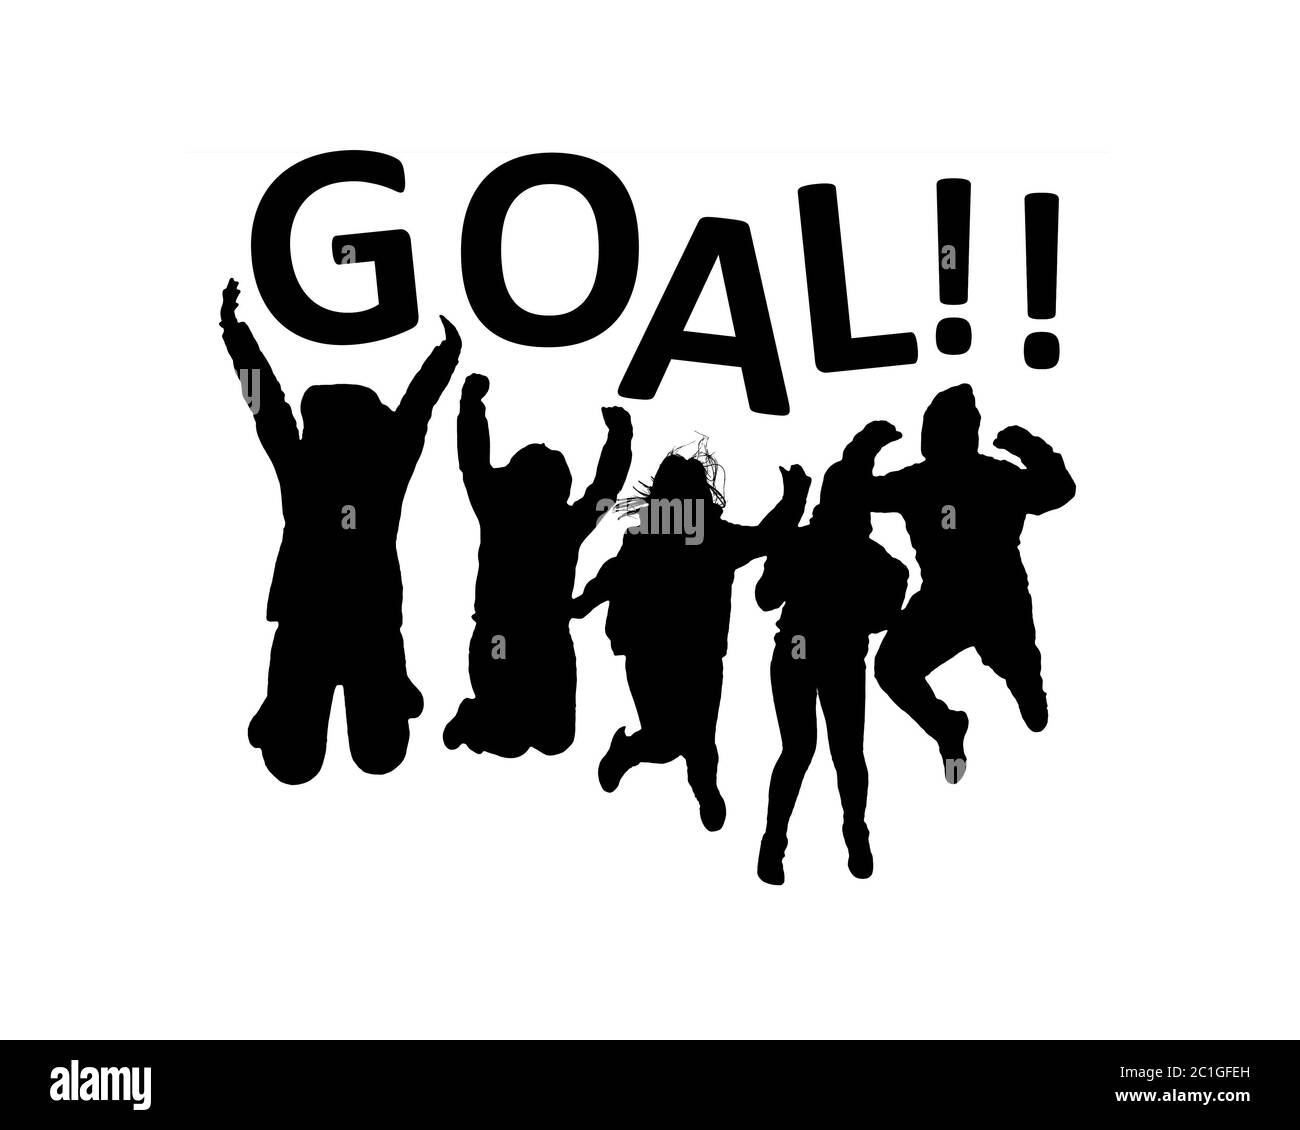 Fans Celebrating Goal Graphic Silhouette IllustrationFans Celebrating Goal Graphic Silhouette Illustration Stock Photo